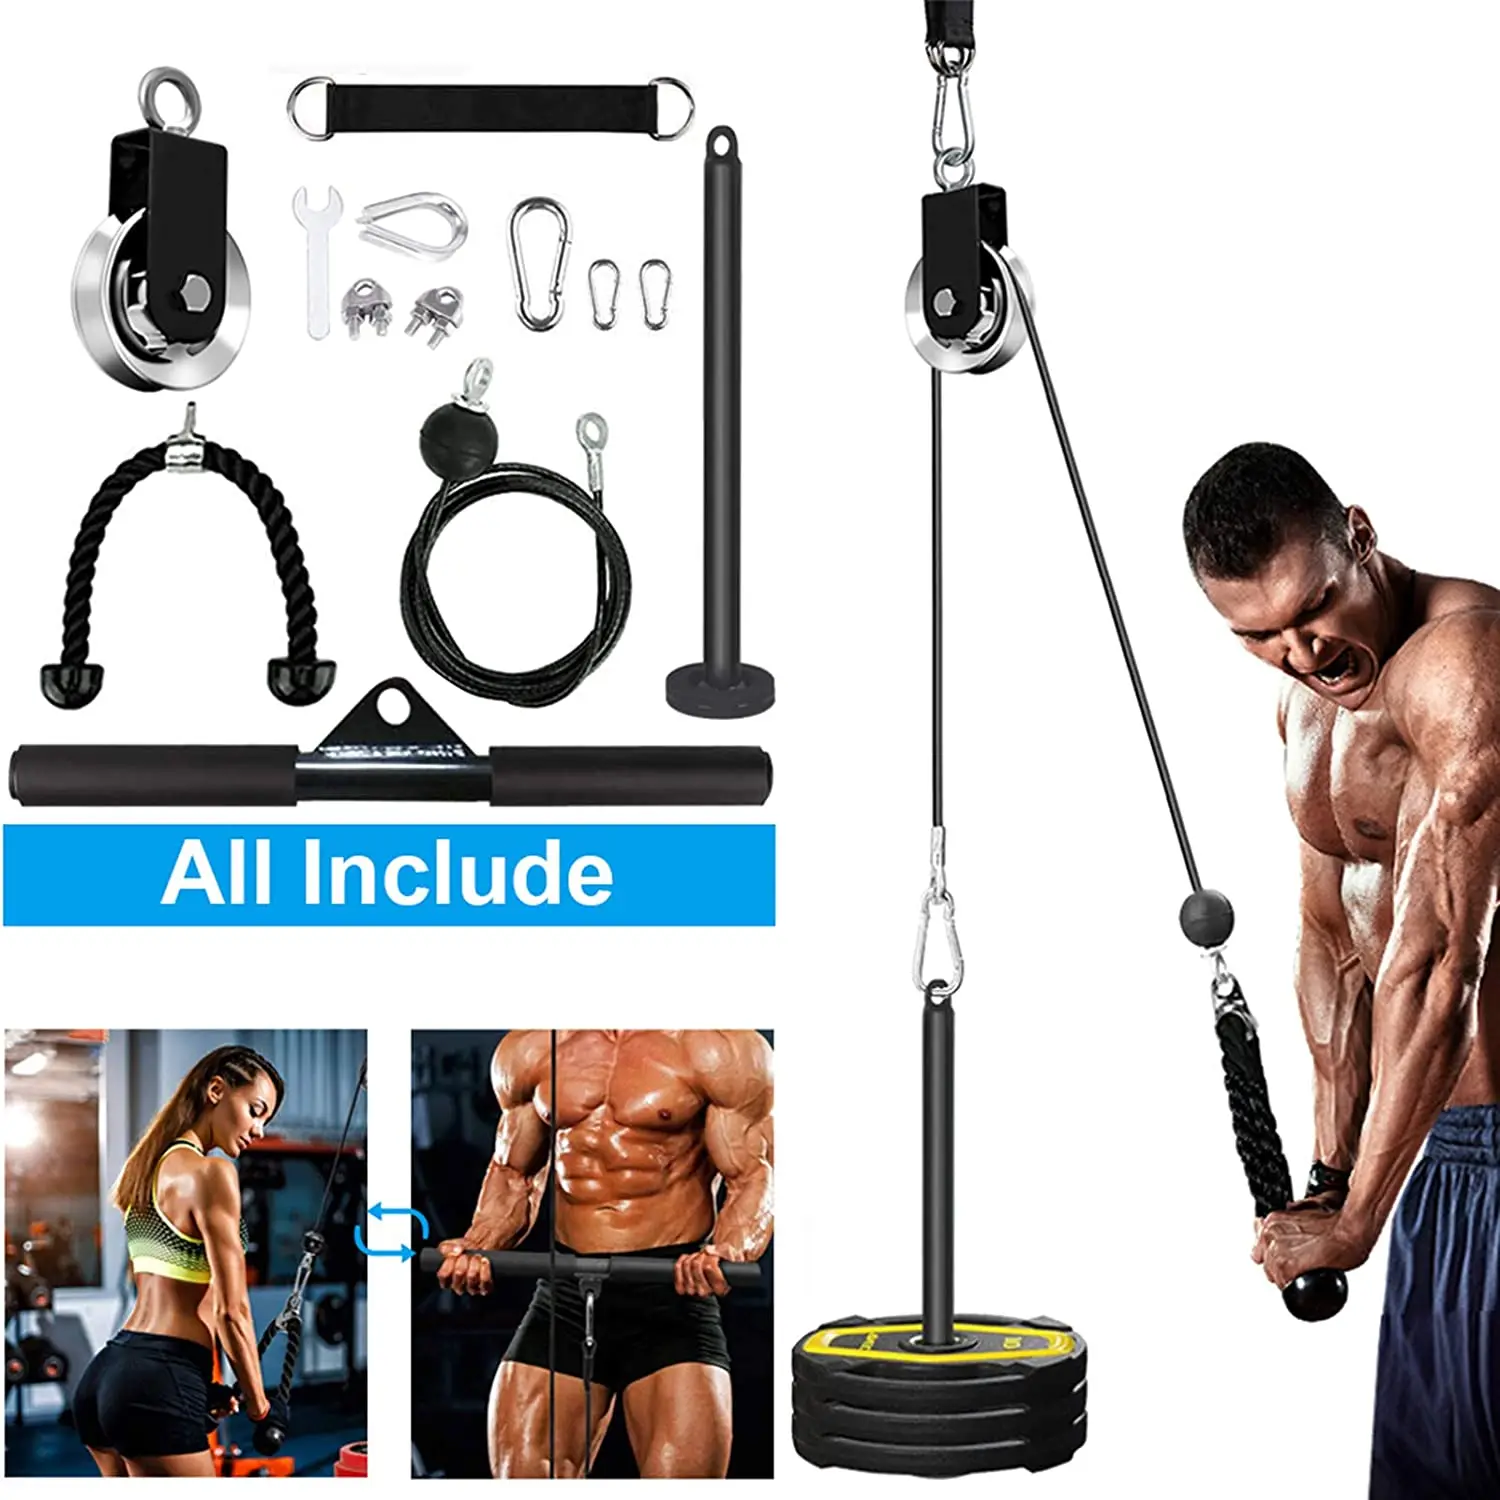 Home Gym Cable Pulley System for Weight Lifting Curl Bar LAT Bar Cable Machine Accessories LAT Pulldown Pulley System Gym with LAT Pull Down Bar Attachments DIY Pulley Cable Machine Attachments 